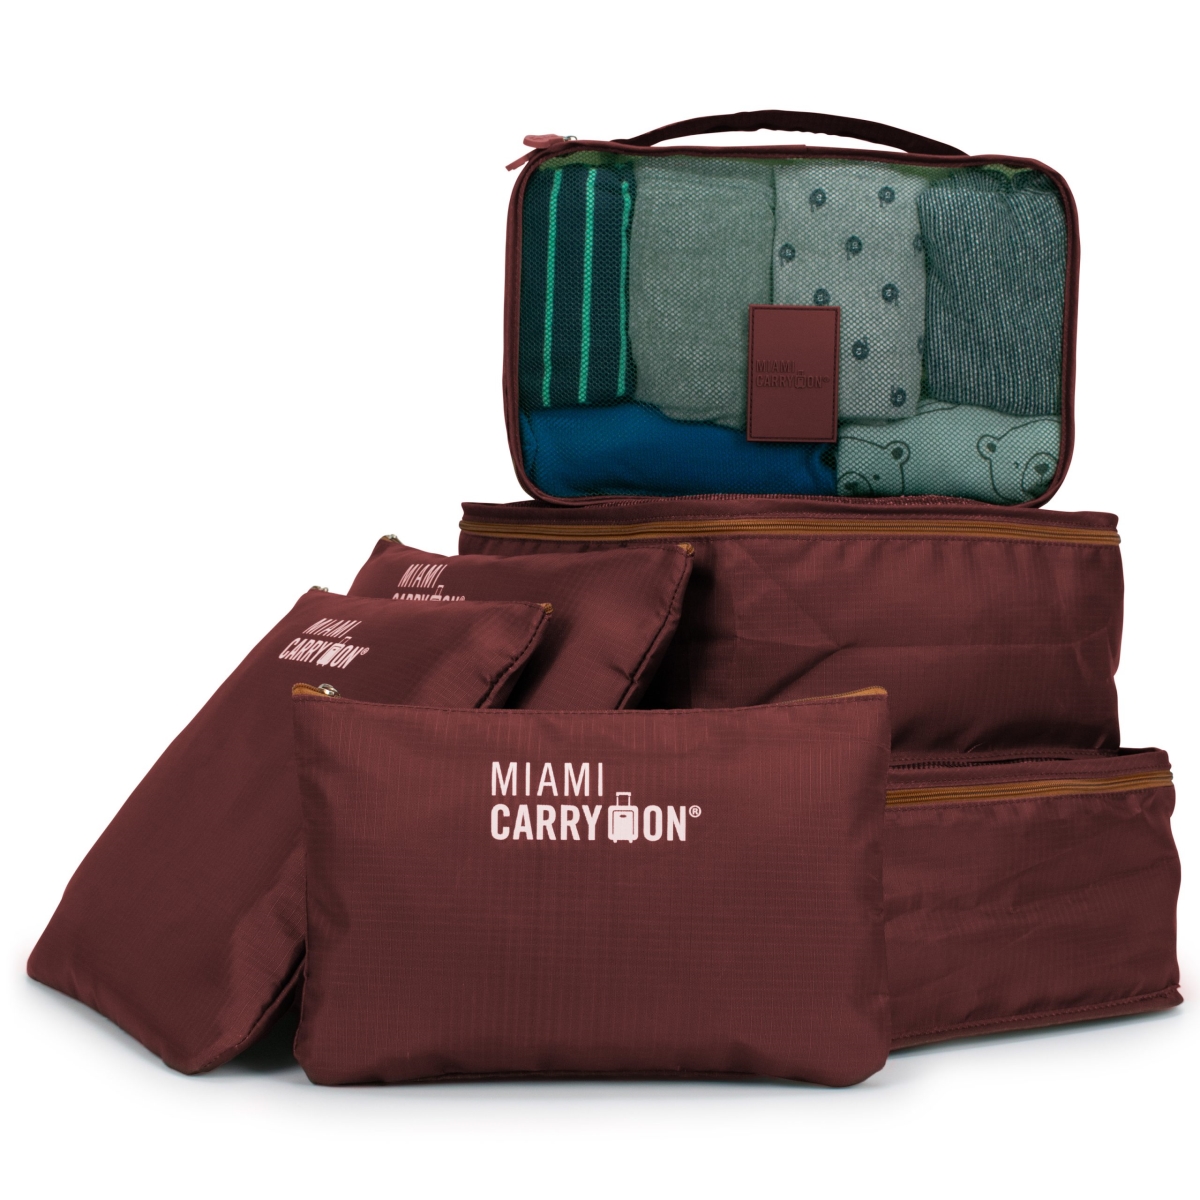 Picture of Miami Carryon TL6SBGBYTN  Collins Packing Cubes Luggage Organizer  Burgundy &amp; Tan - 6 Piece